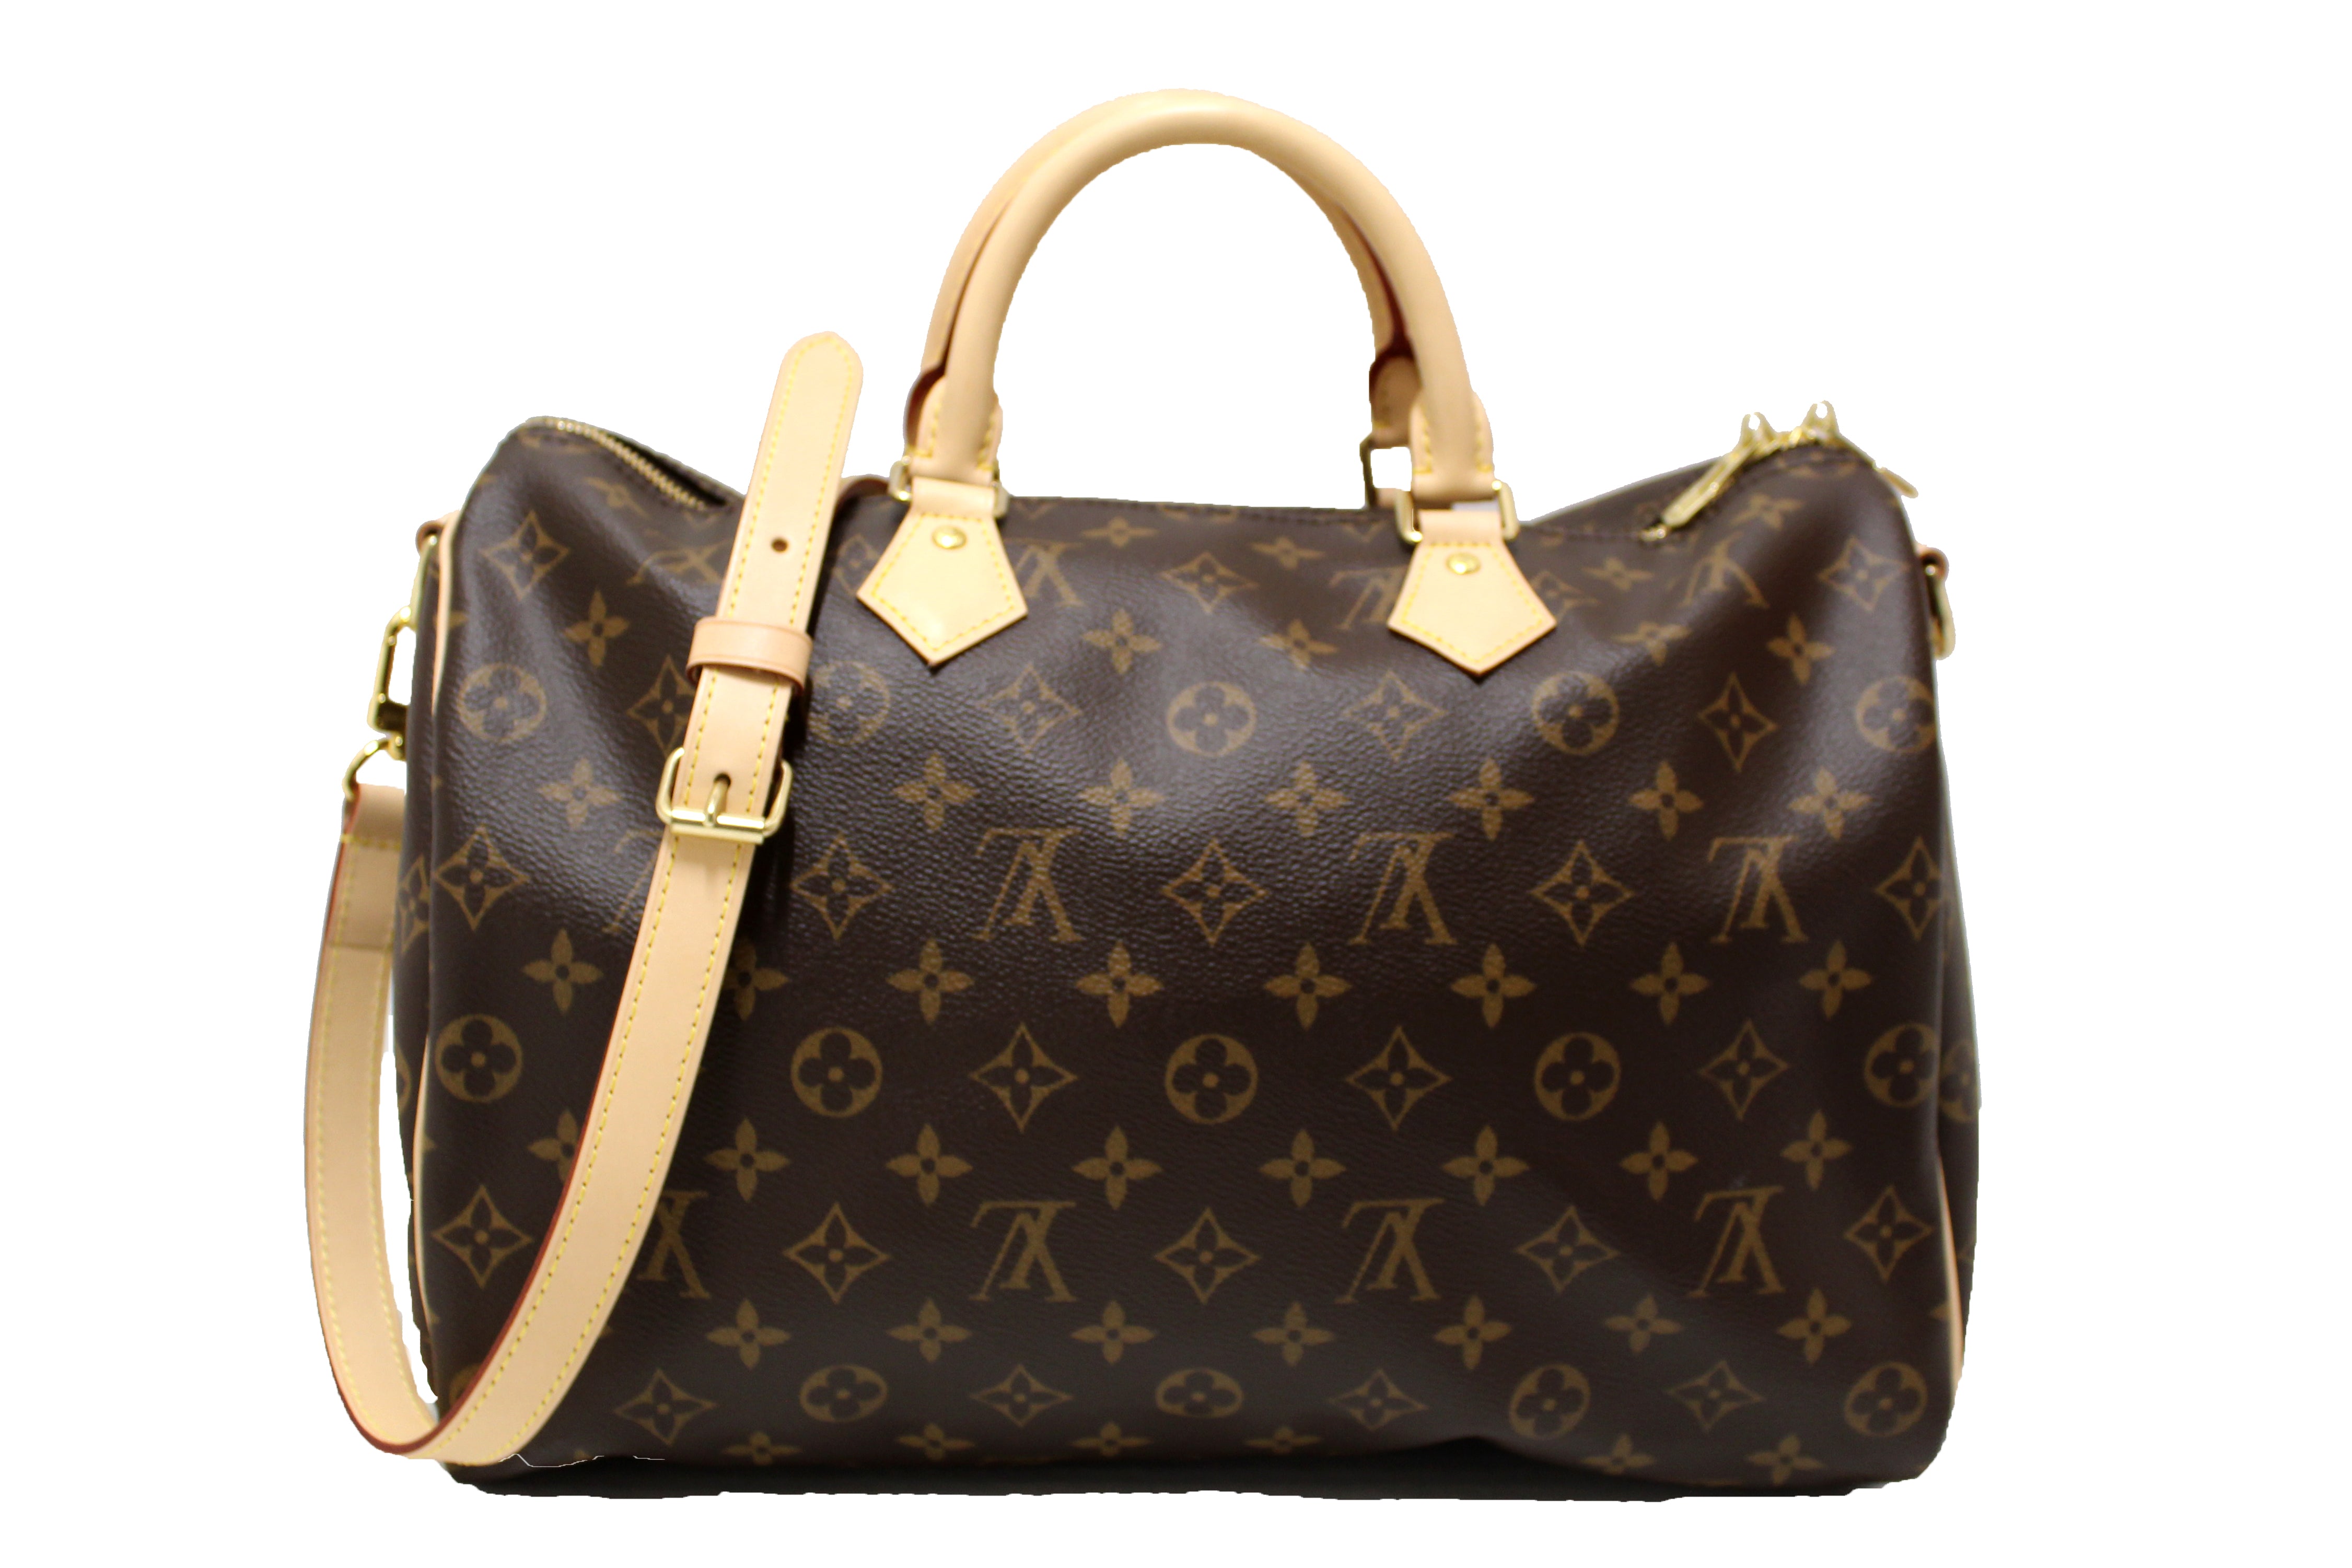 Louis Vuitton Speedy Bandouliere 35 - very used condition, no strap